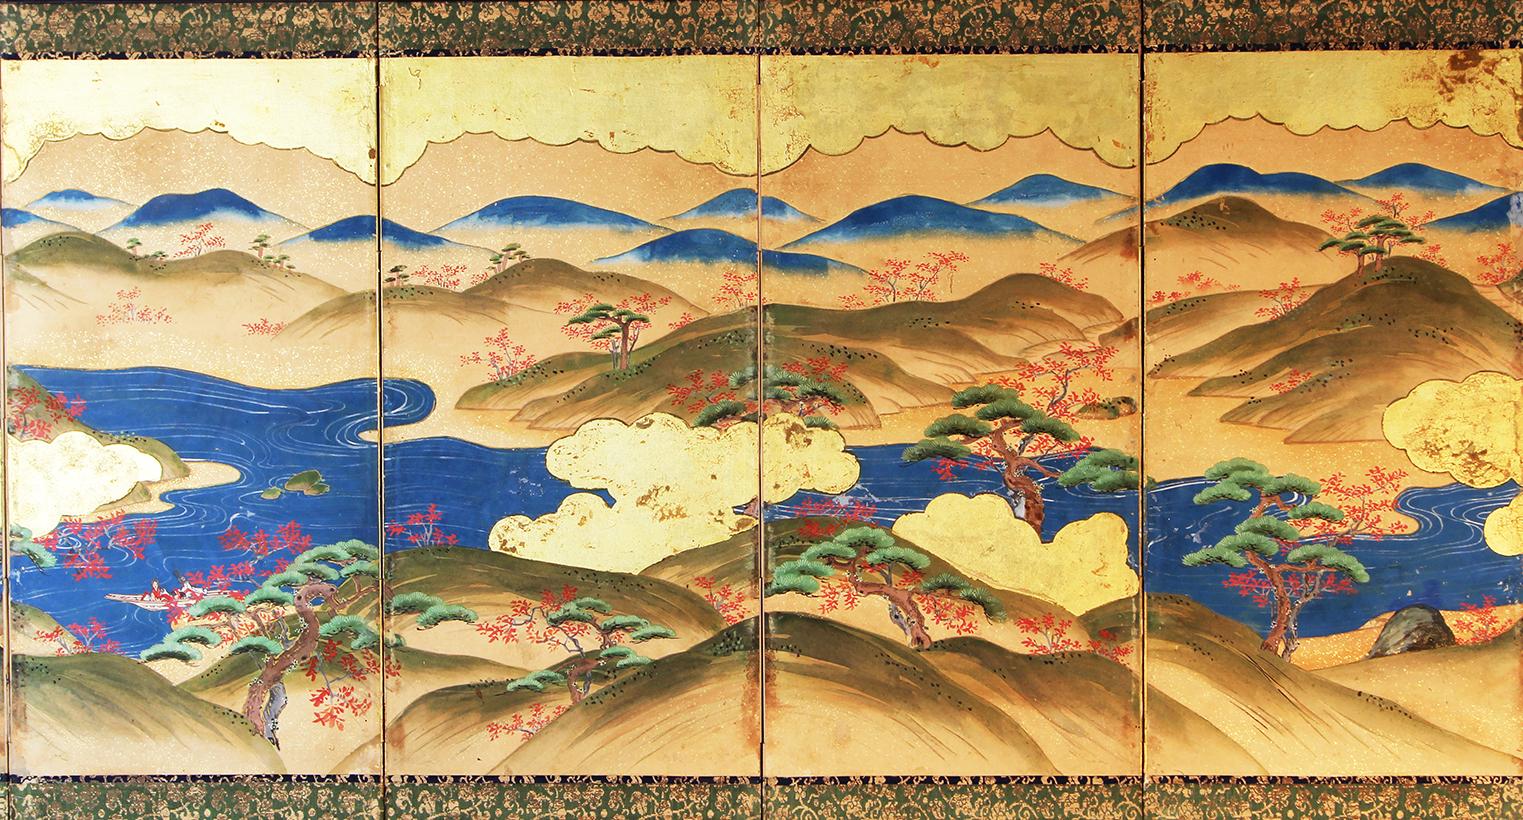 Edo Period, six panels Japanese folding screen hand painted inks and mineral pigment on vegetable paper and gold leaf.